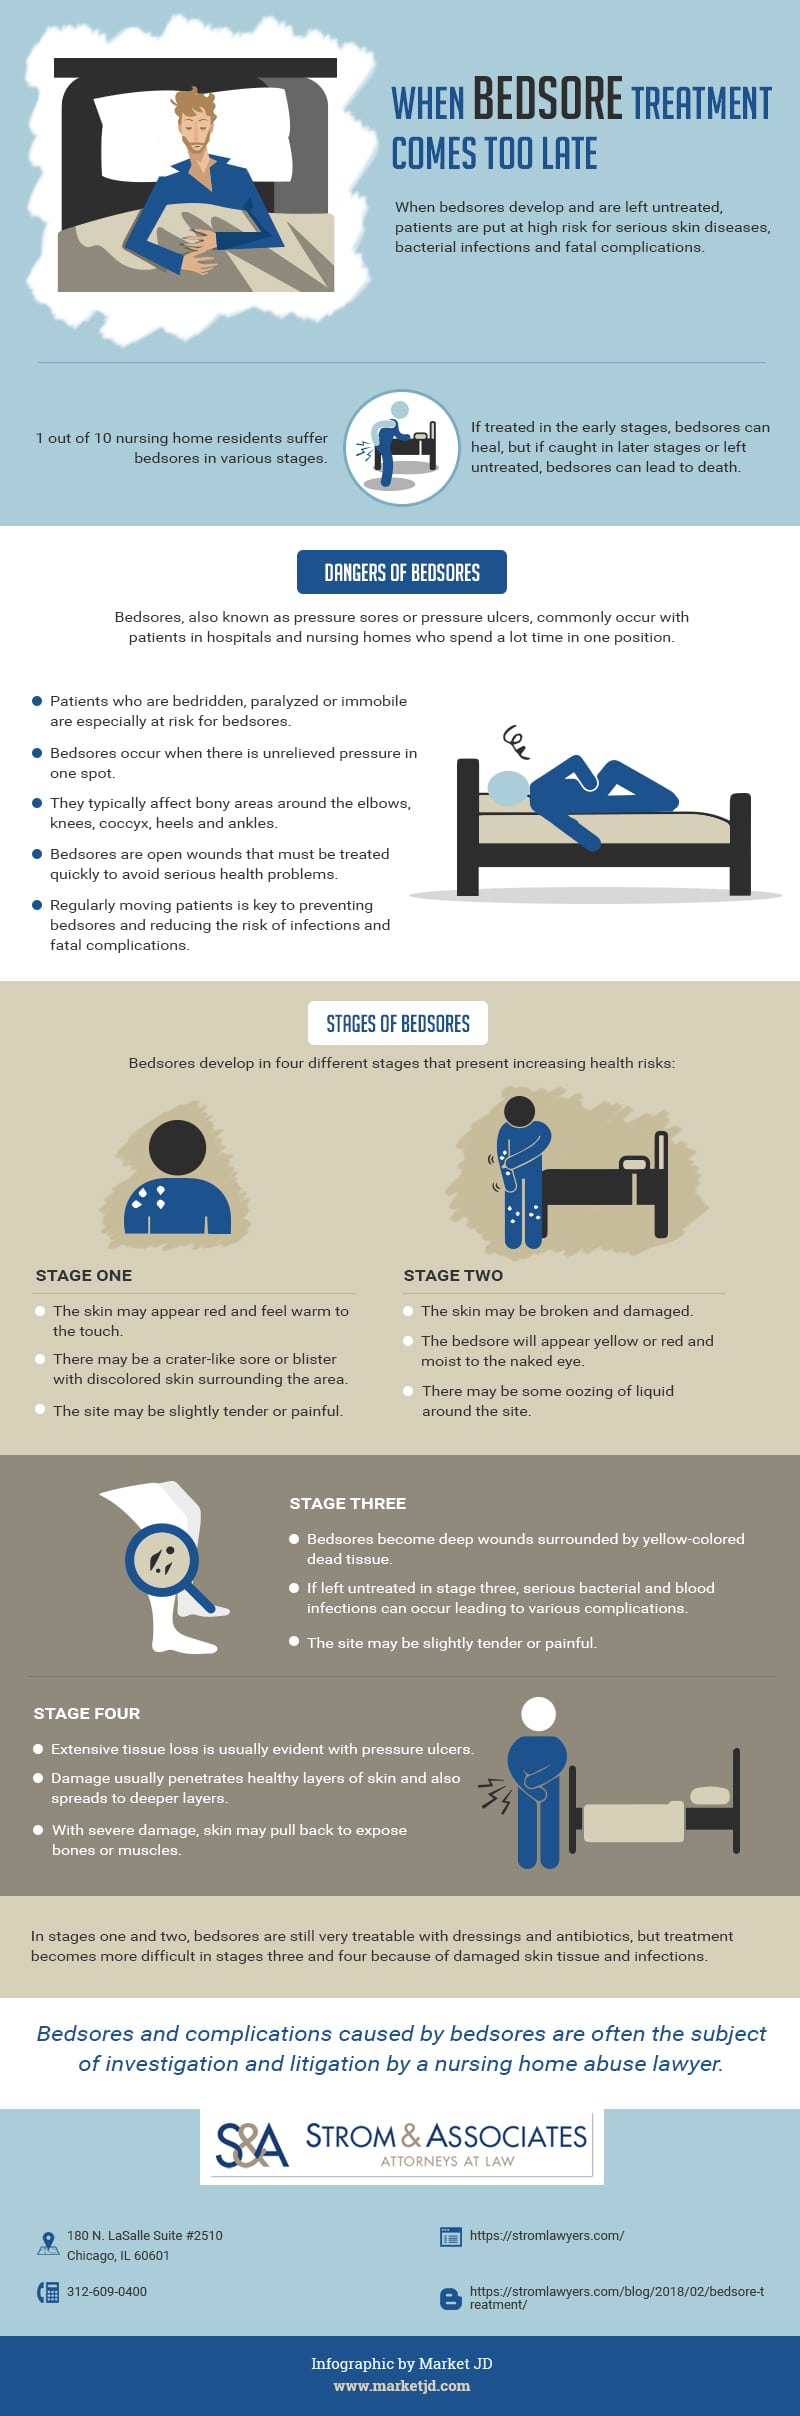 infographic-When Bedsore Treatment Comes Too Late3